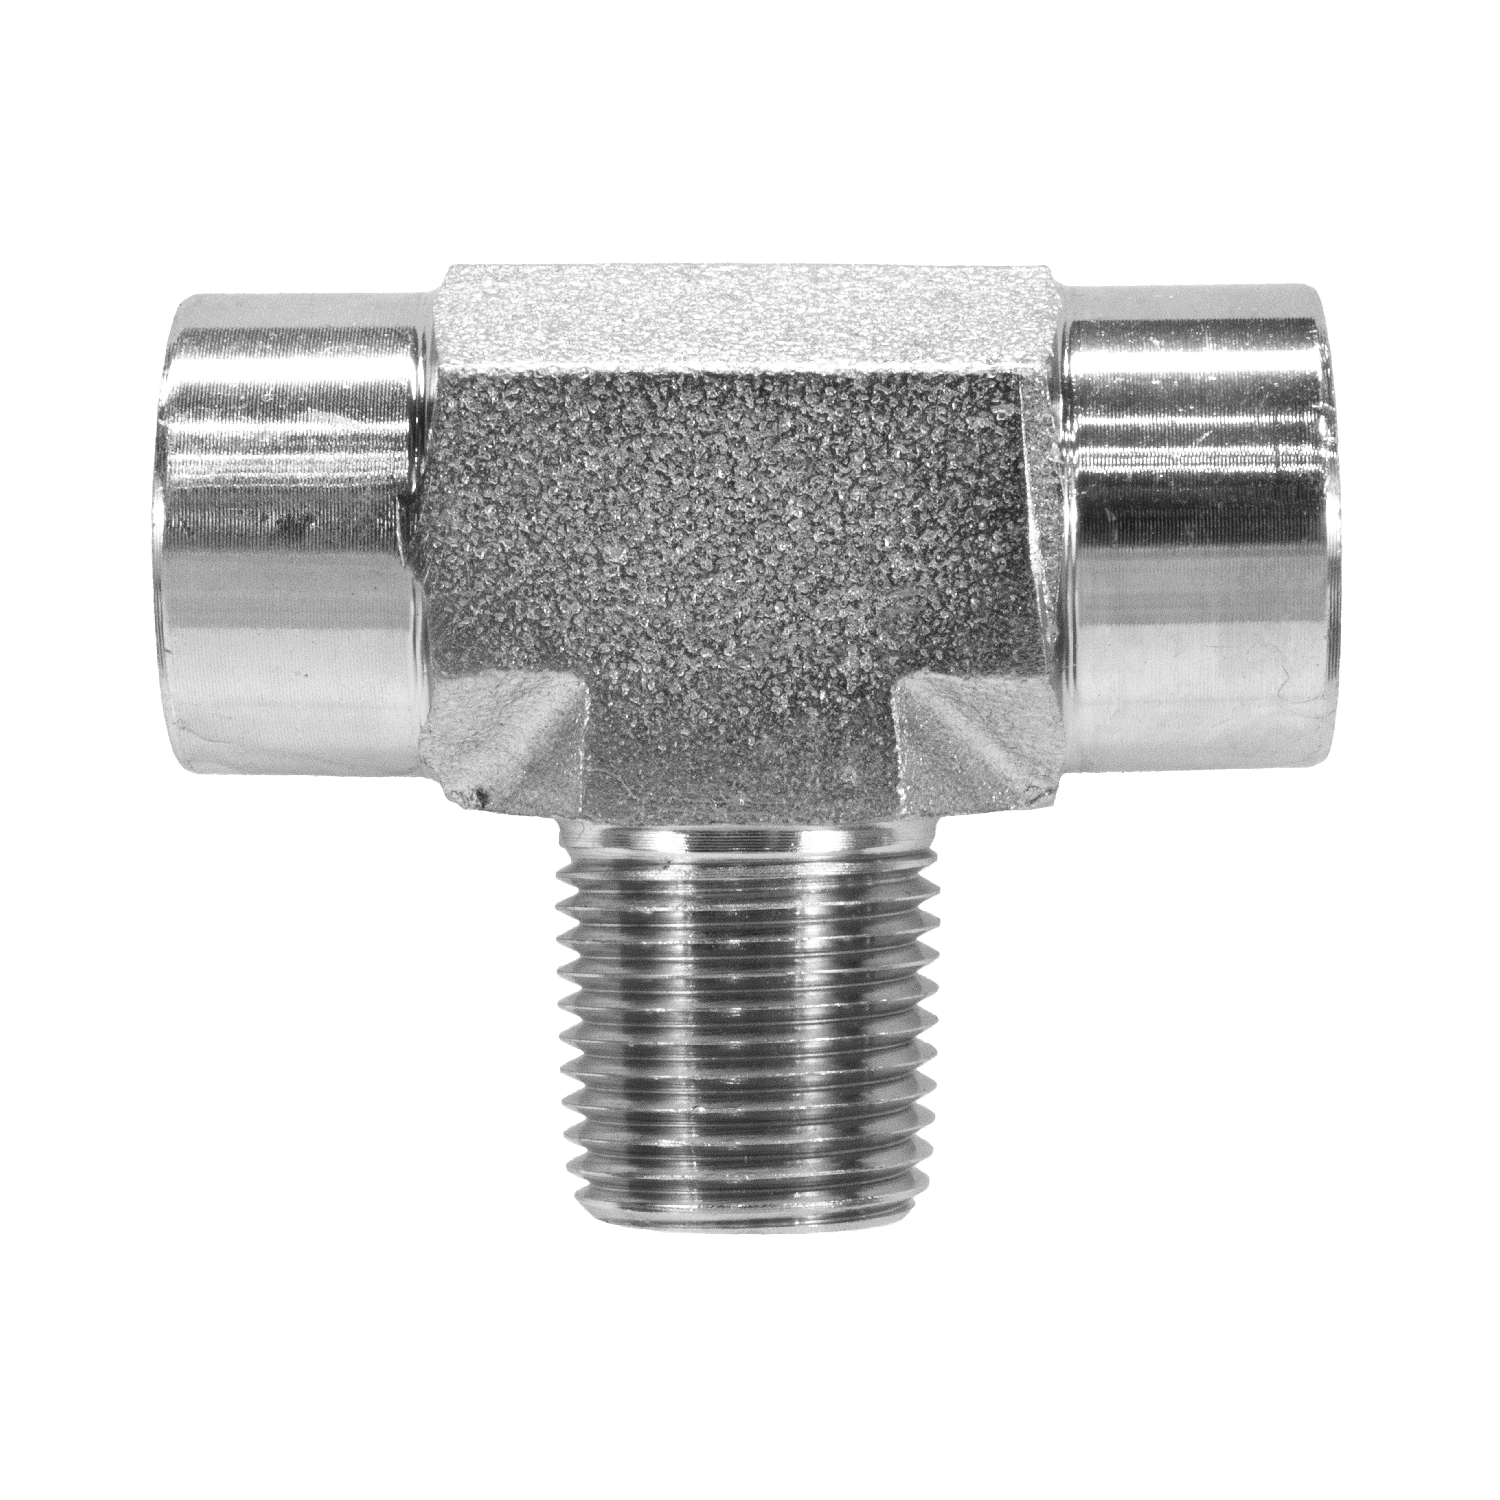 5604-adapters-fittings